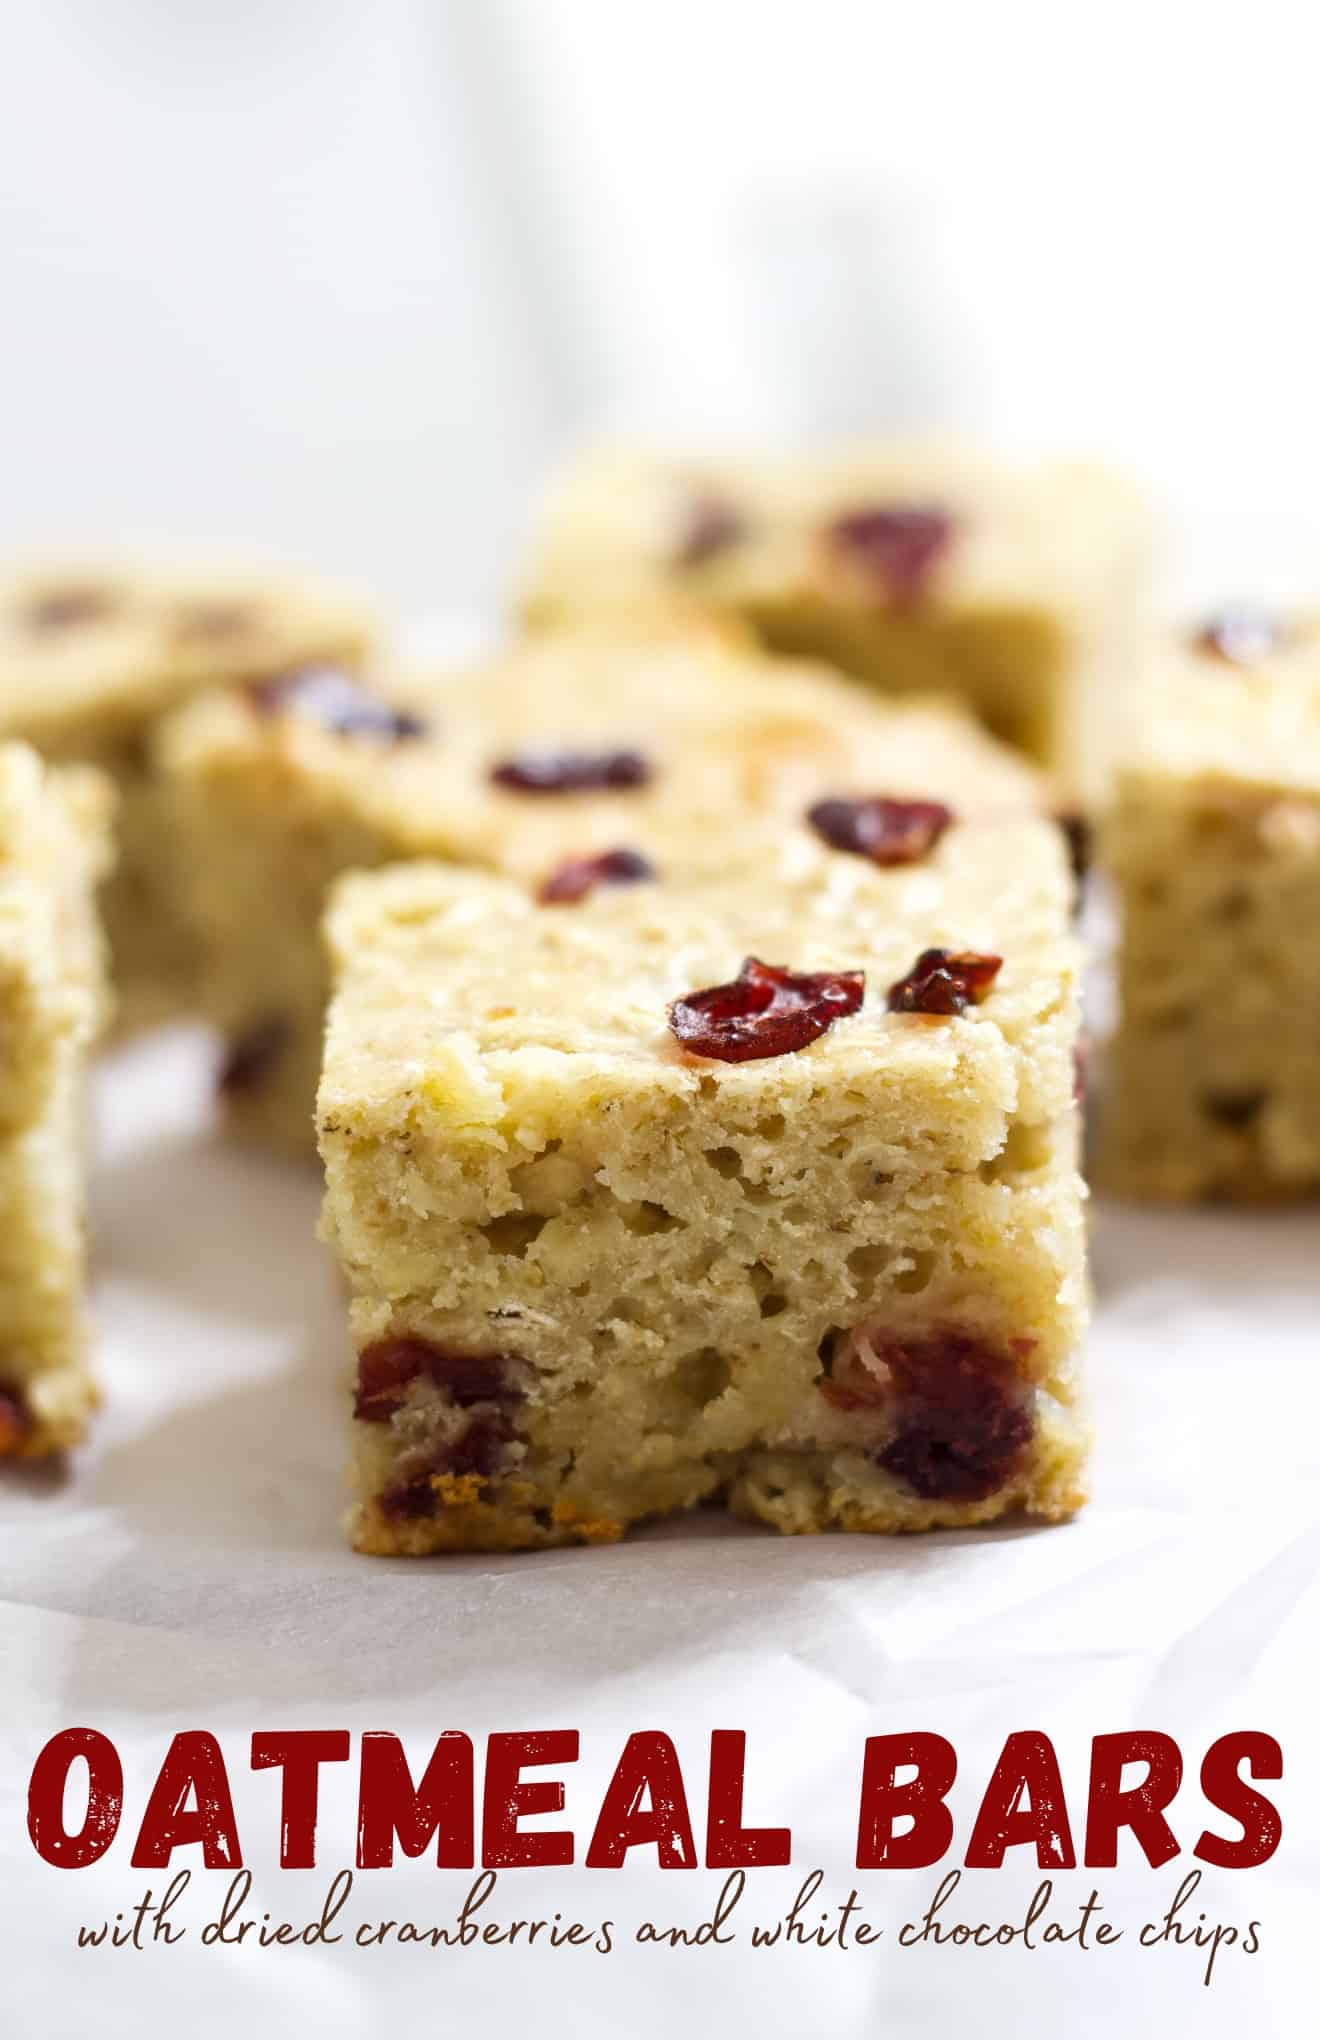 Healthy Oatmeal Bars recipe replaces the oil with unsweetened applesauce to make these a great option for breakfast or a healthier dessert. via @mindyscookingobsession